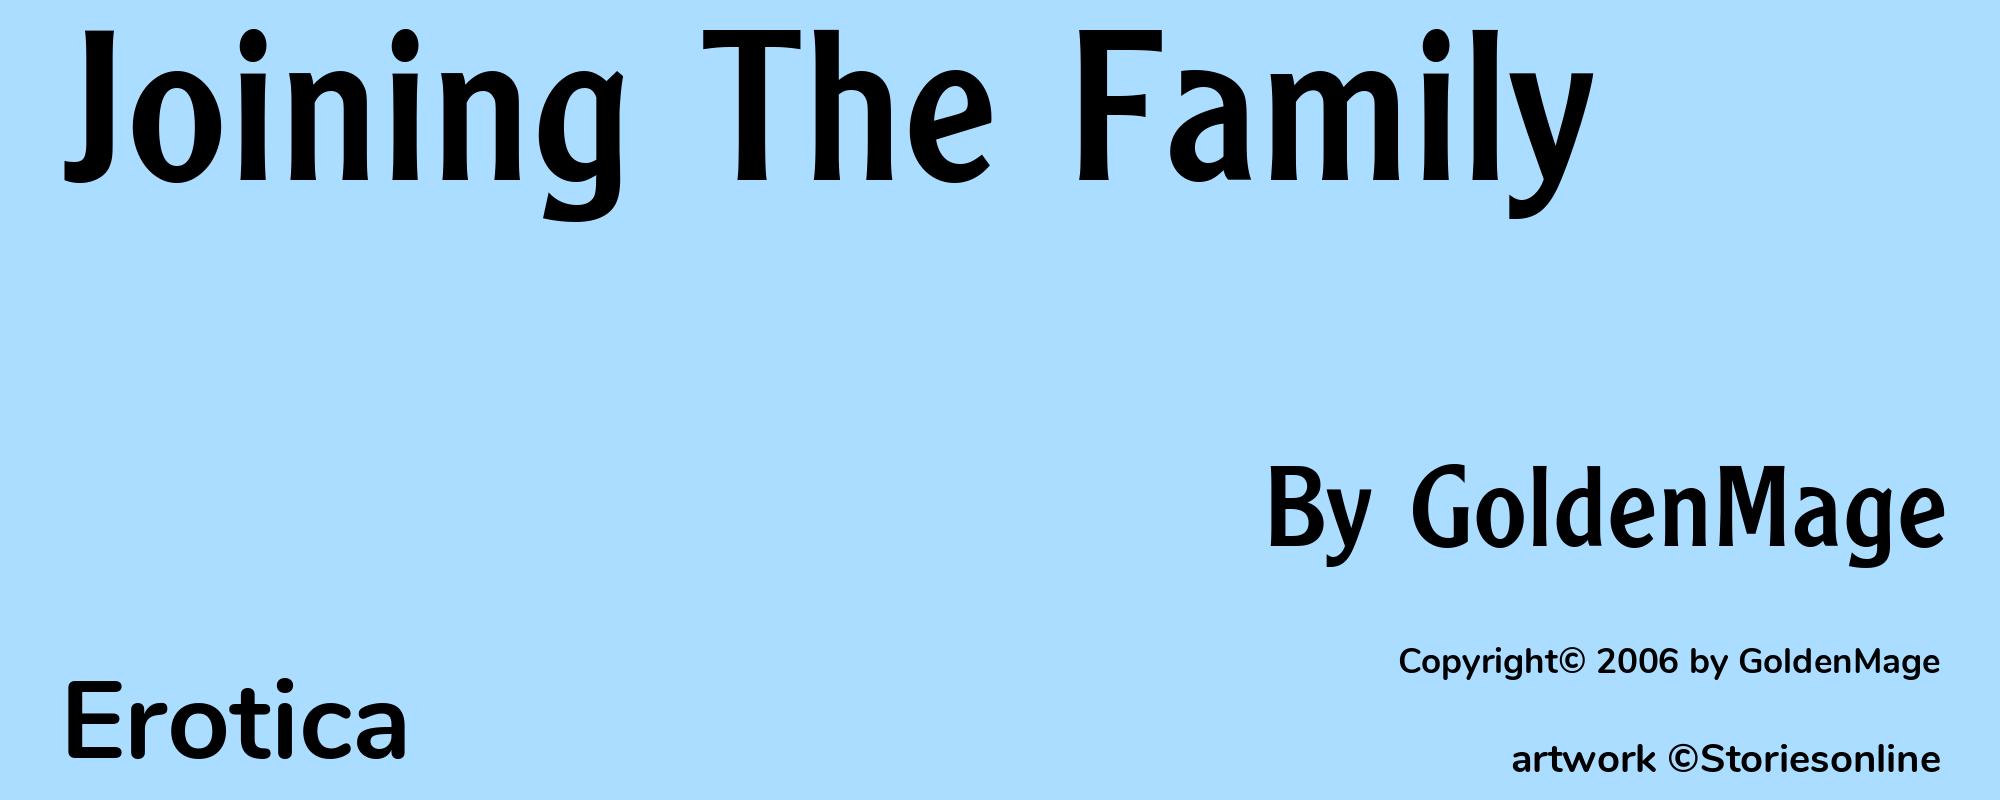 Joining The Family - Cover